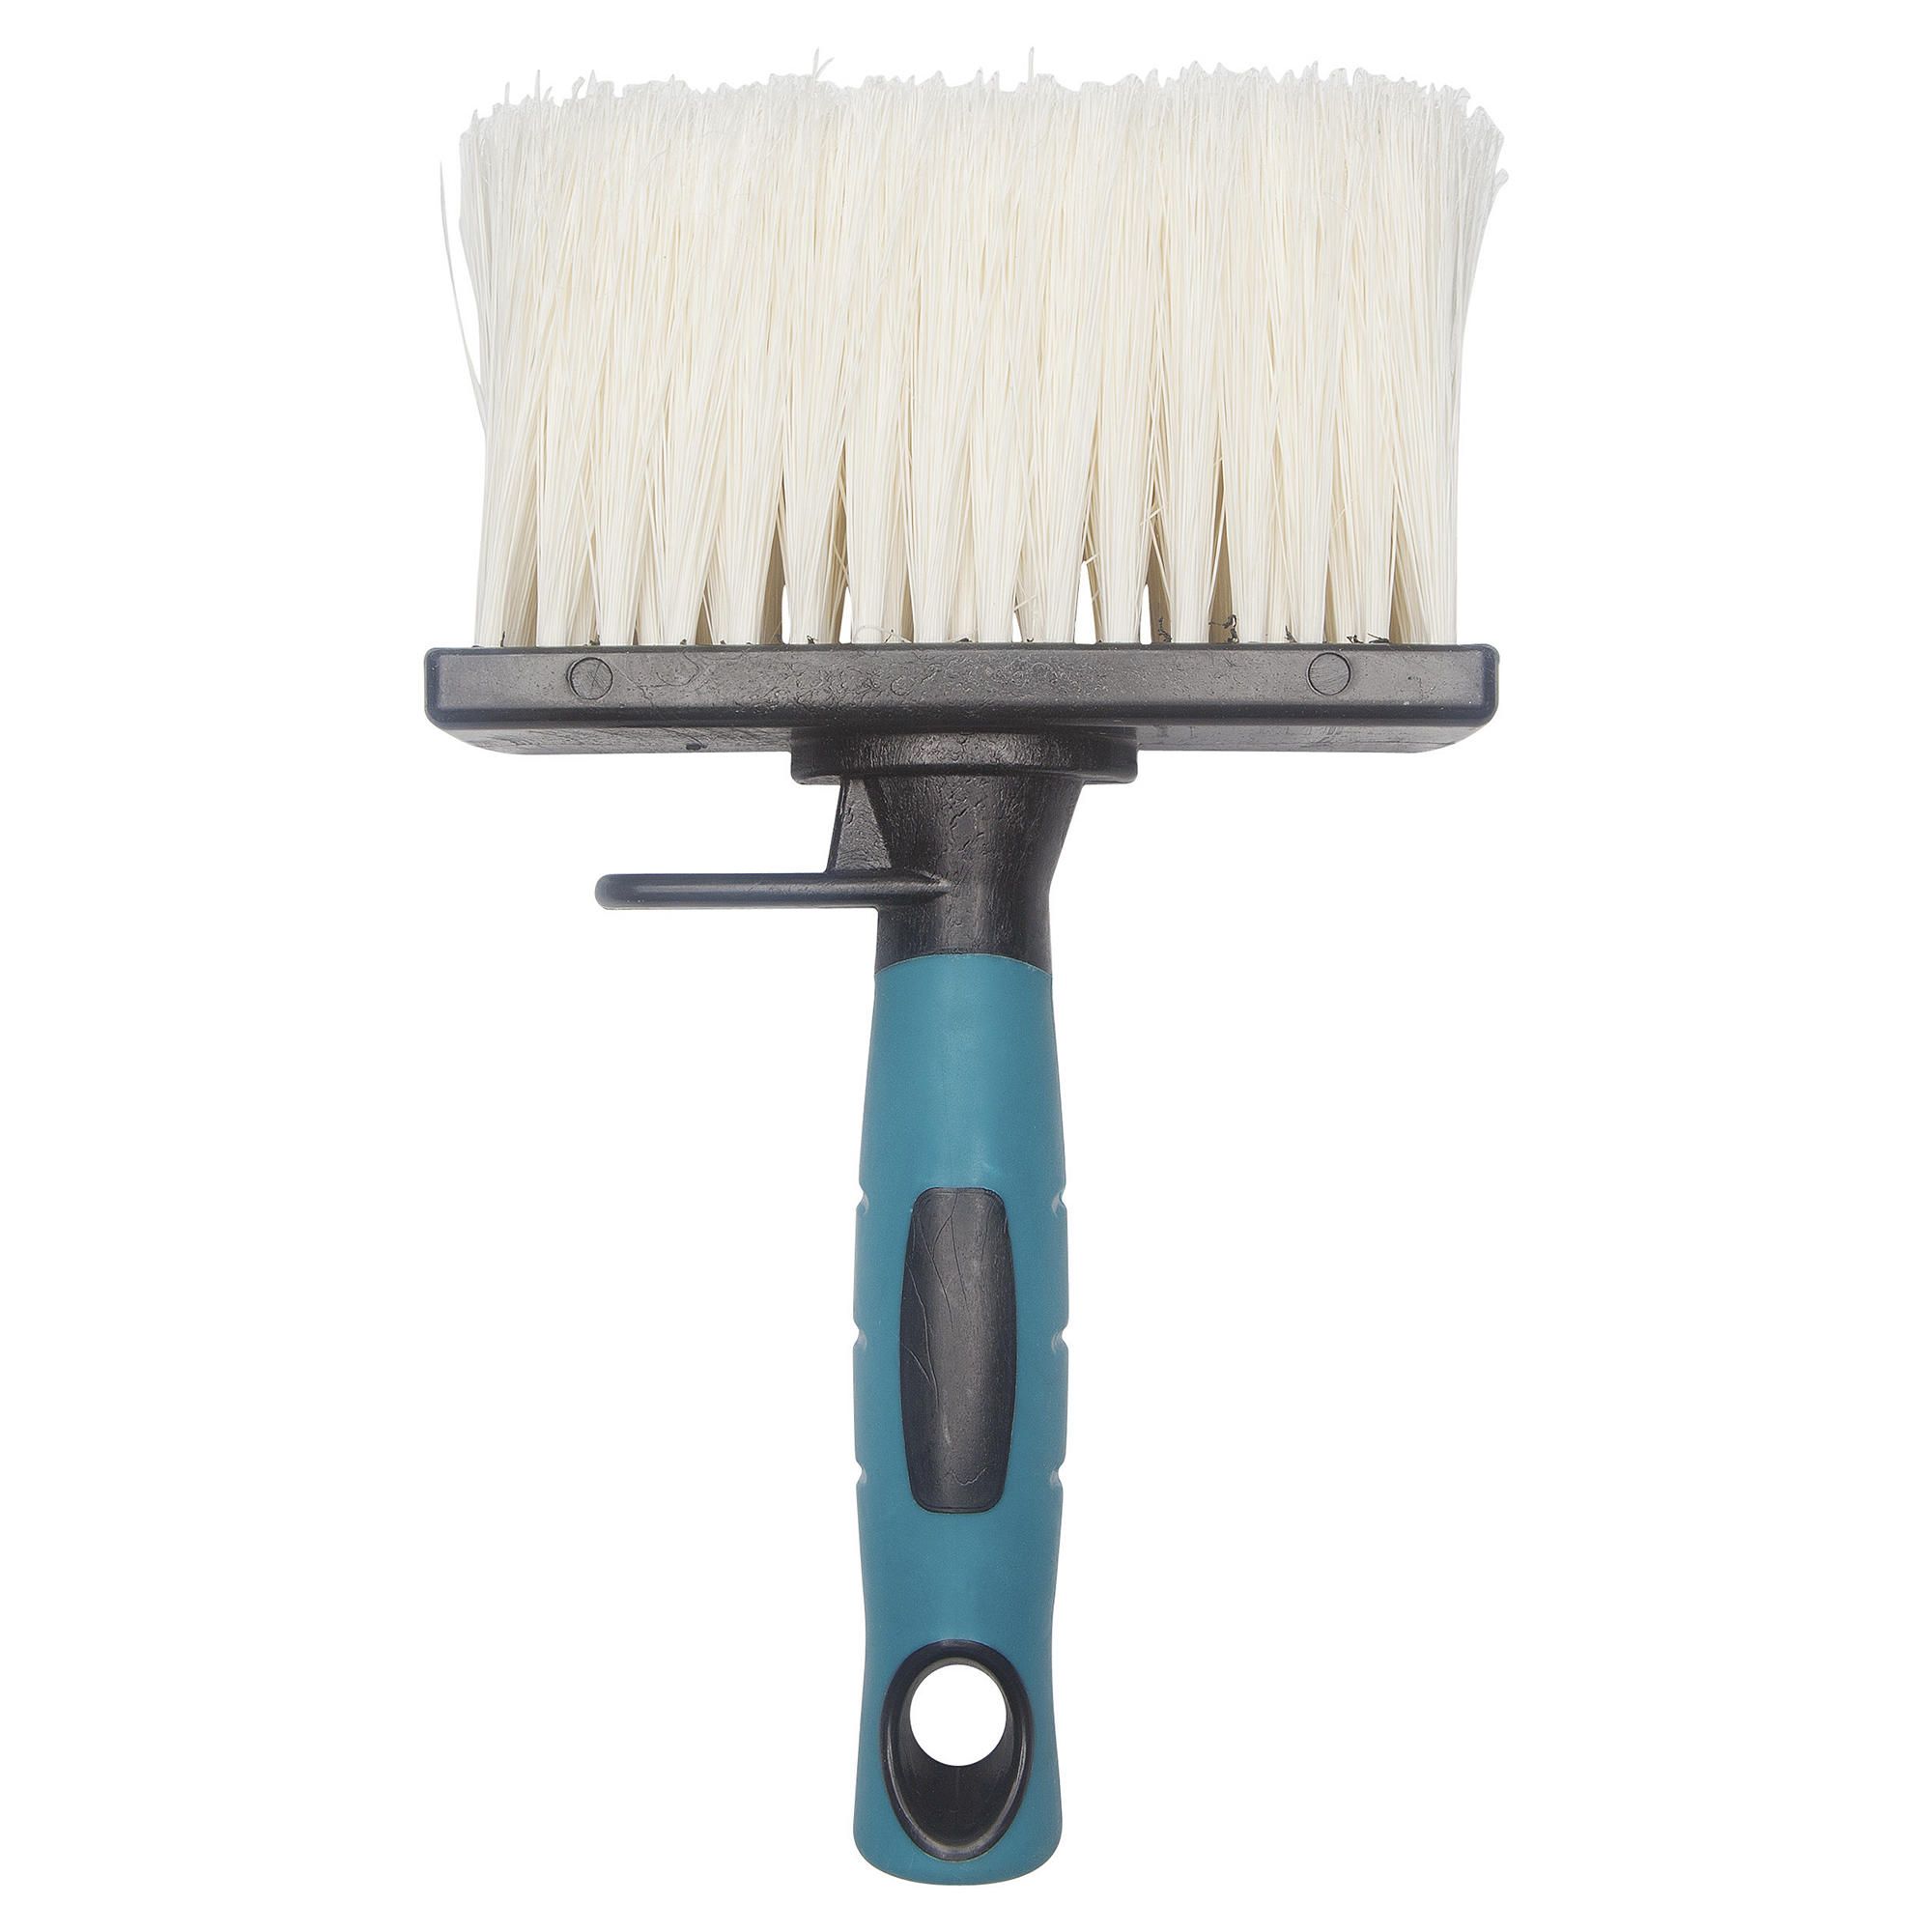 Tesco Wall Paper Paste Brush This Provides A Simple